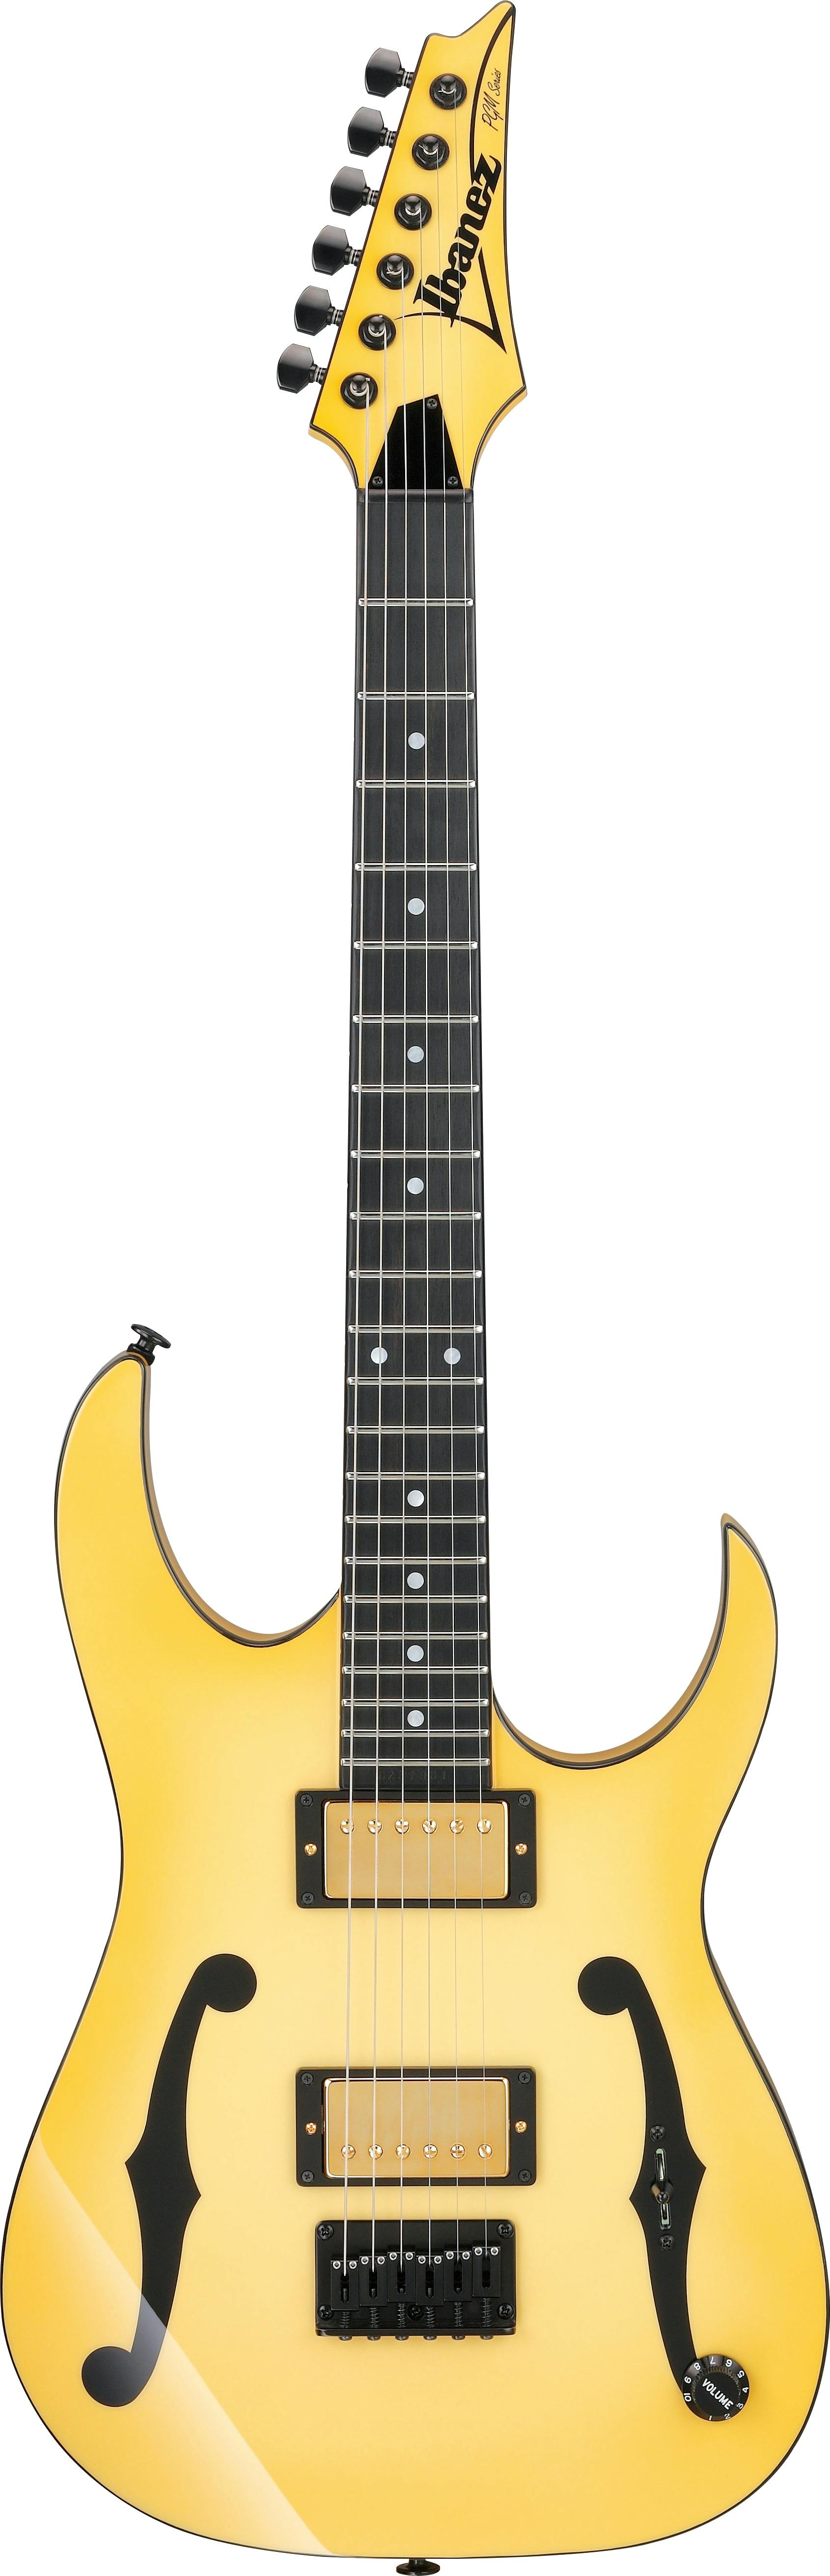 Ibanez Paul Gilbert Signature PGM1000T Electric Guitar in Aged Cream Burst  - Andertons Music Co.